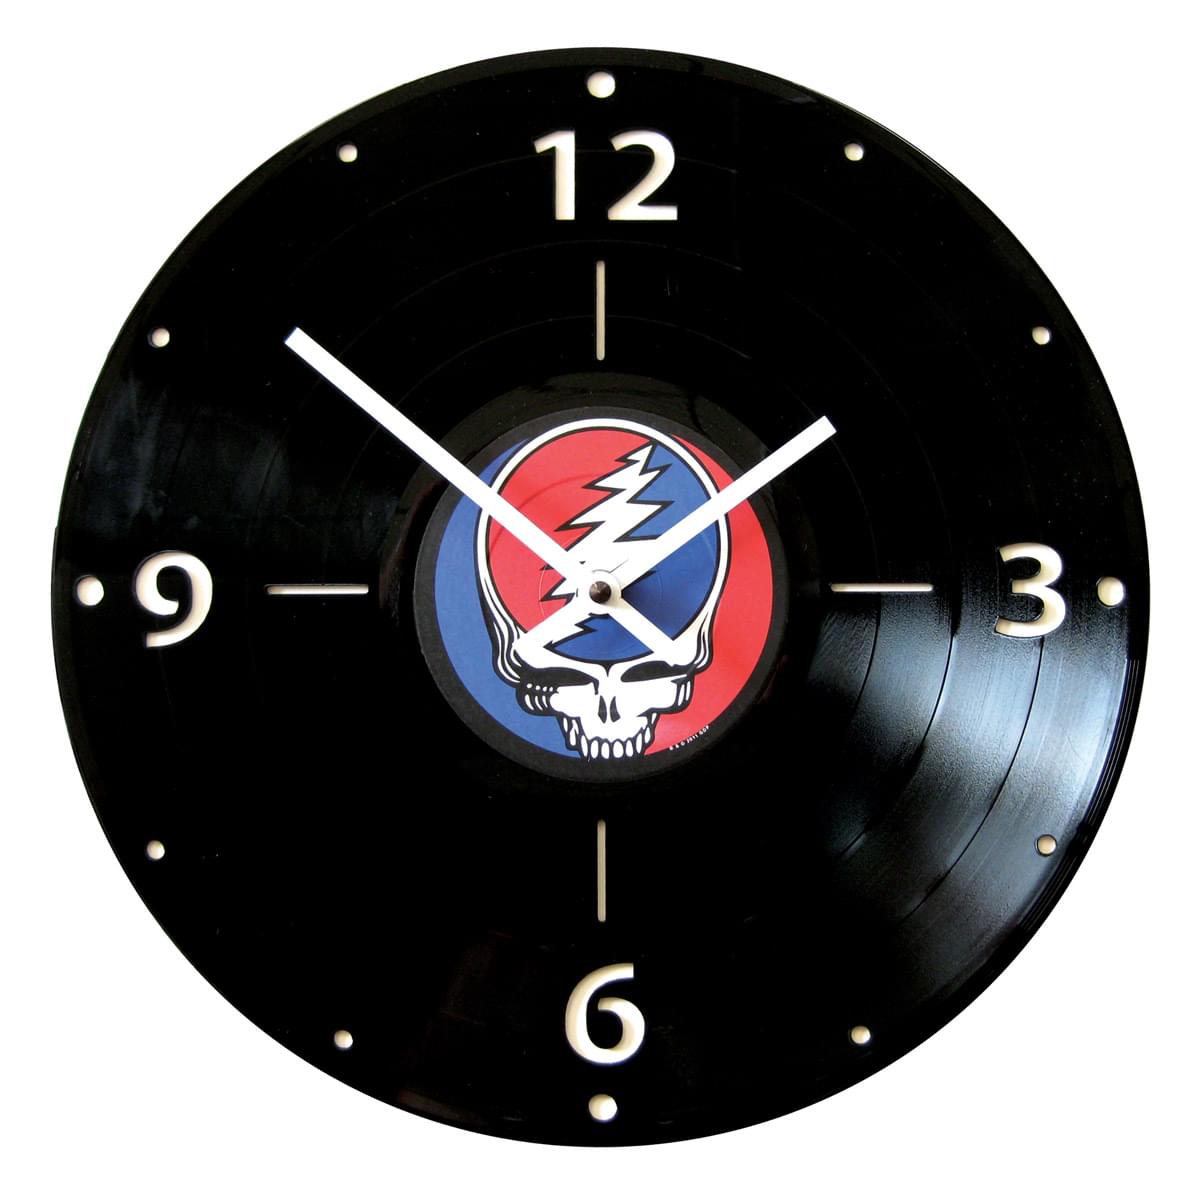 Recycled Vinyl Record LP Wall Clock - 2 Layer